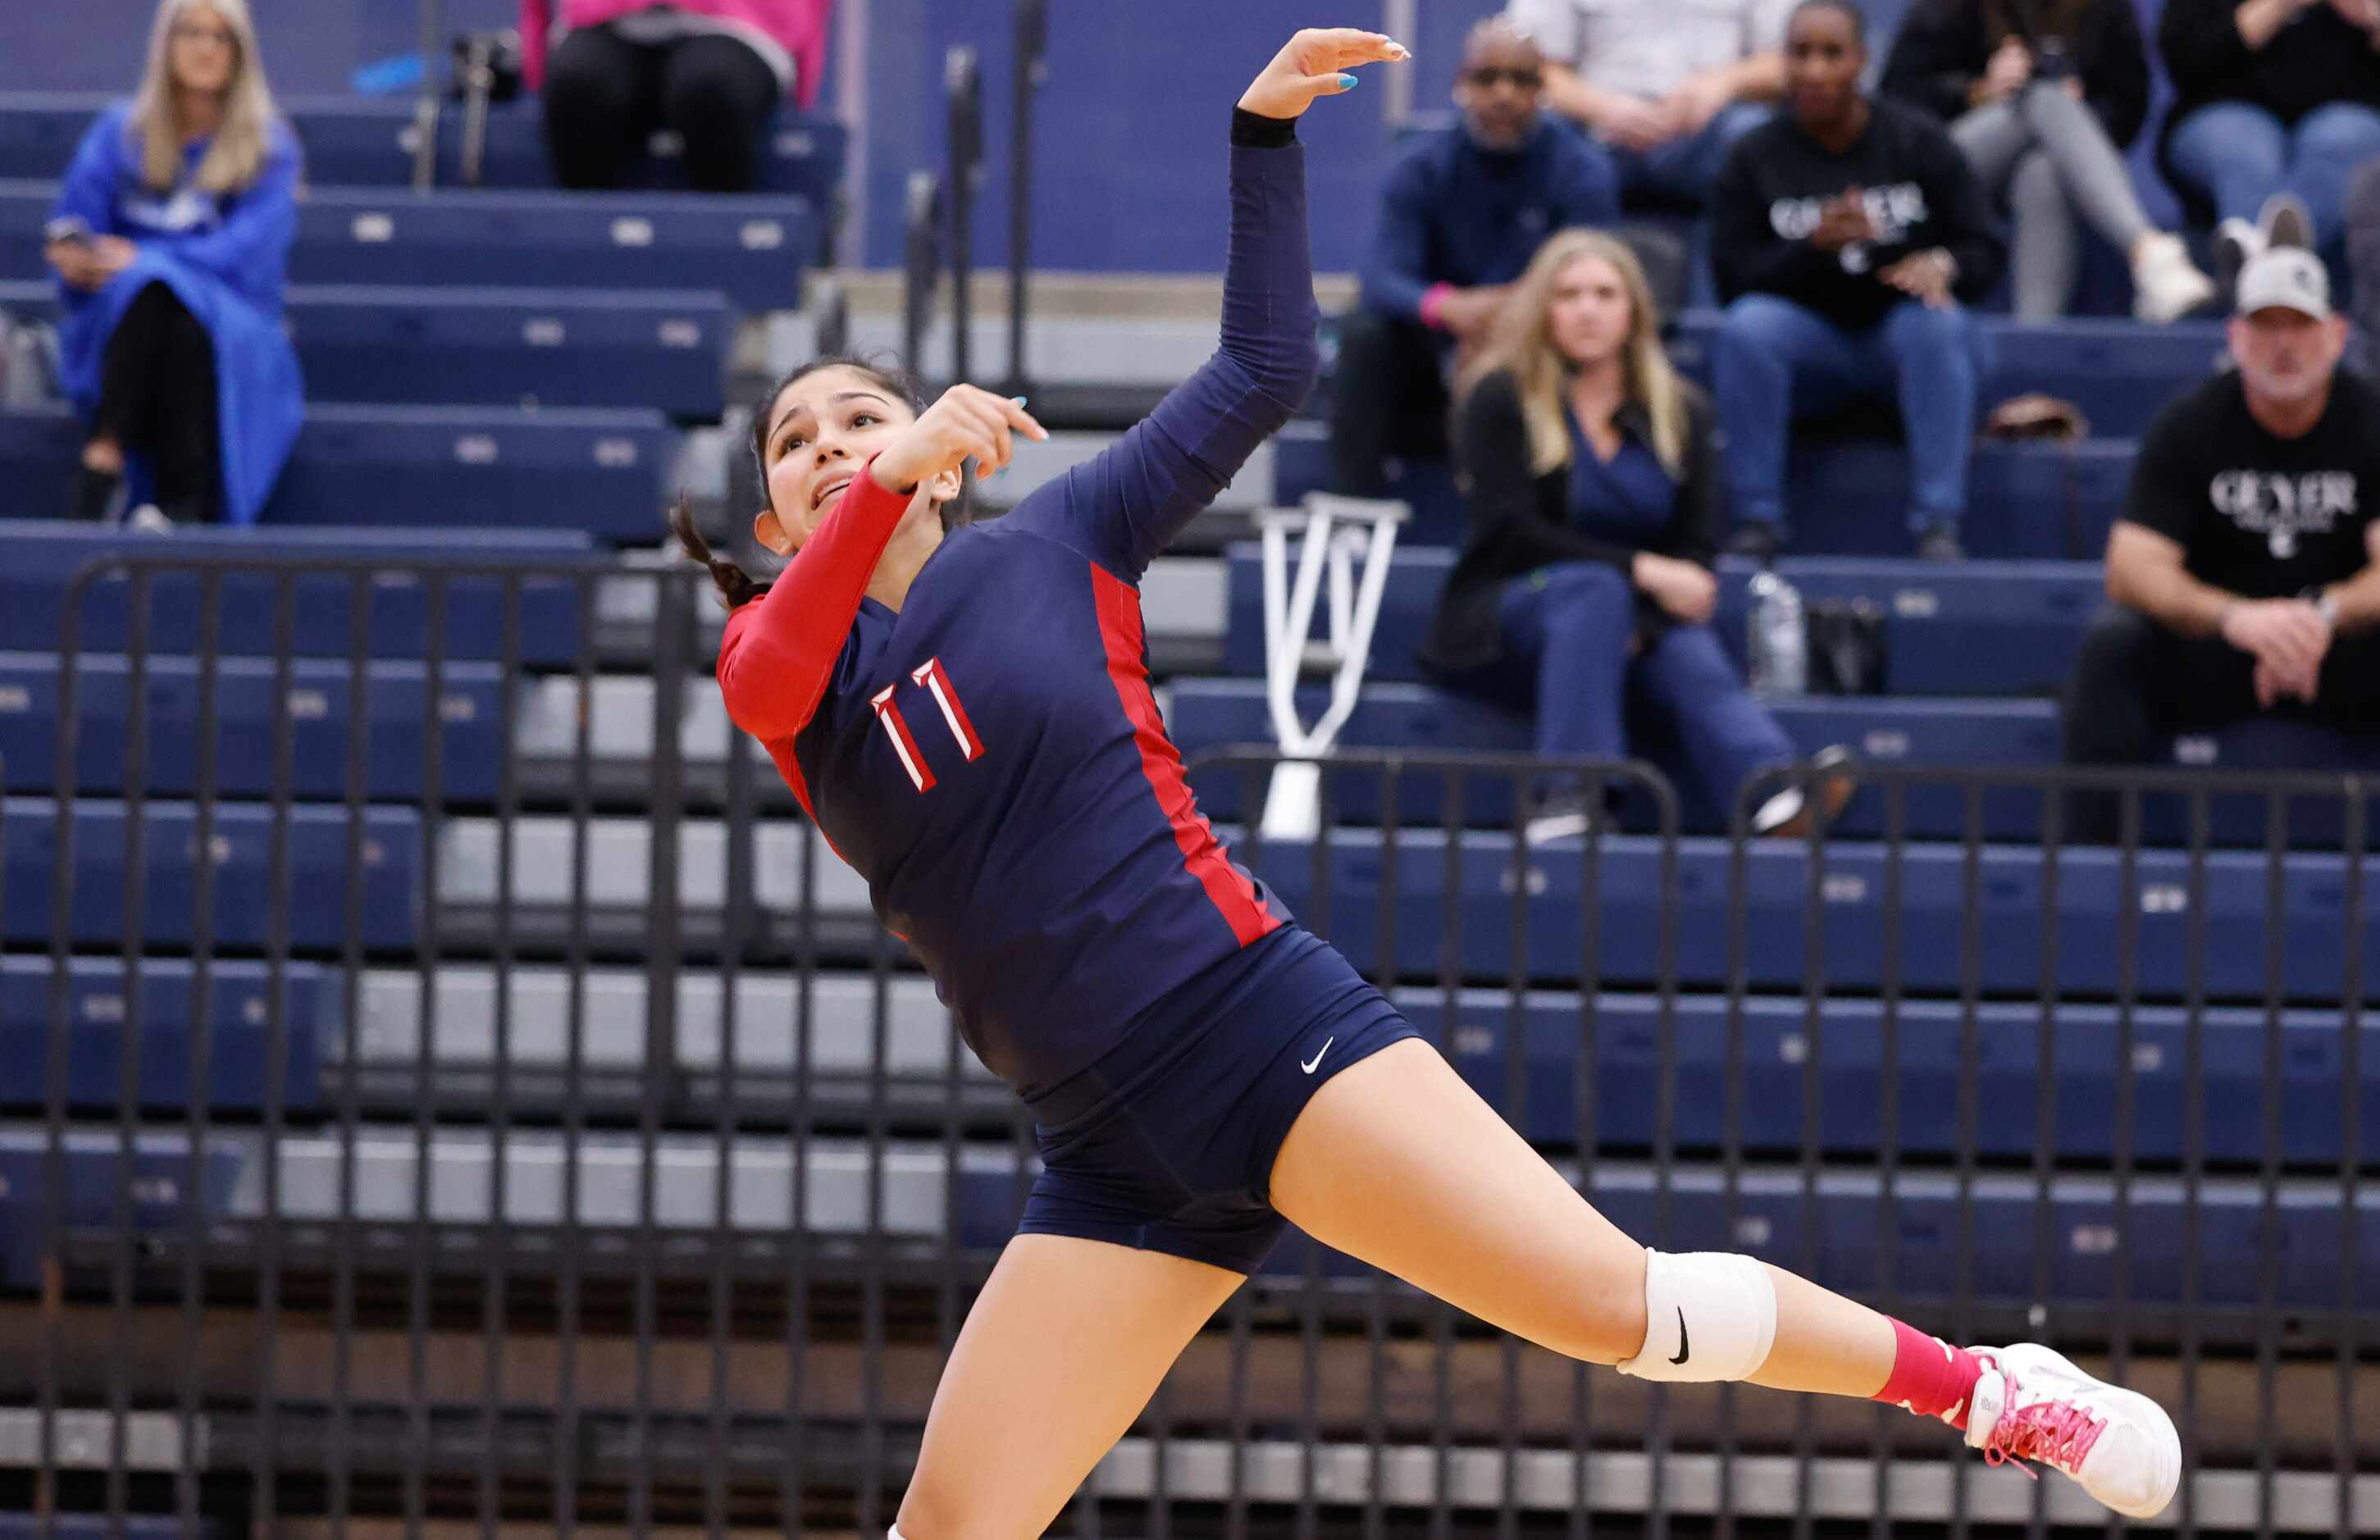 Allen senior Mia Brown (11) falls sideways after running back on the court to volley a ball...